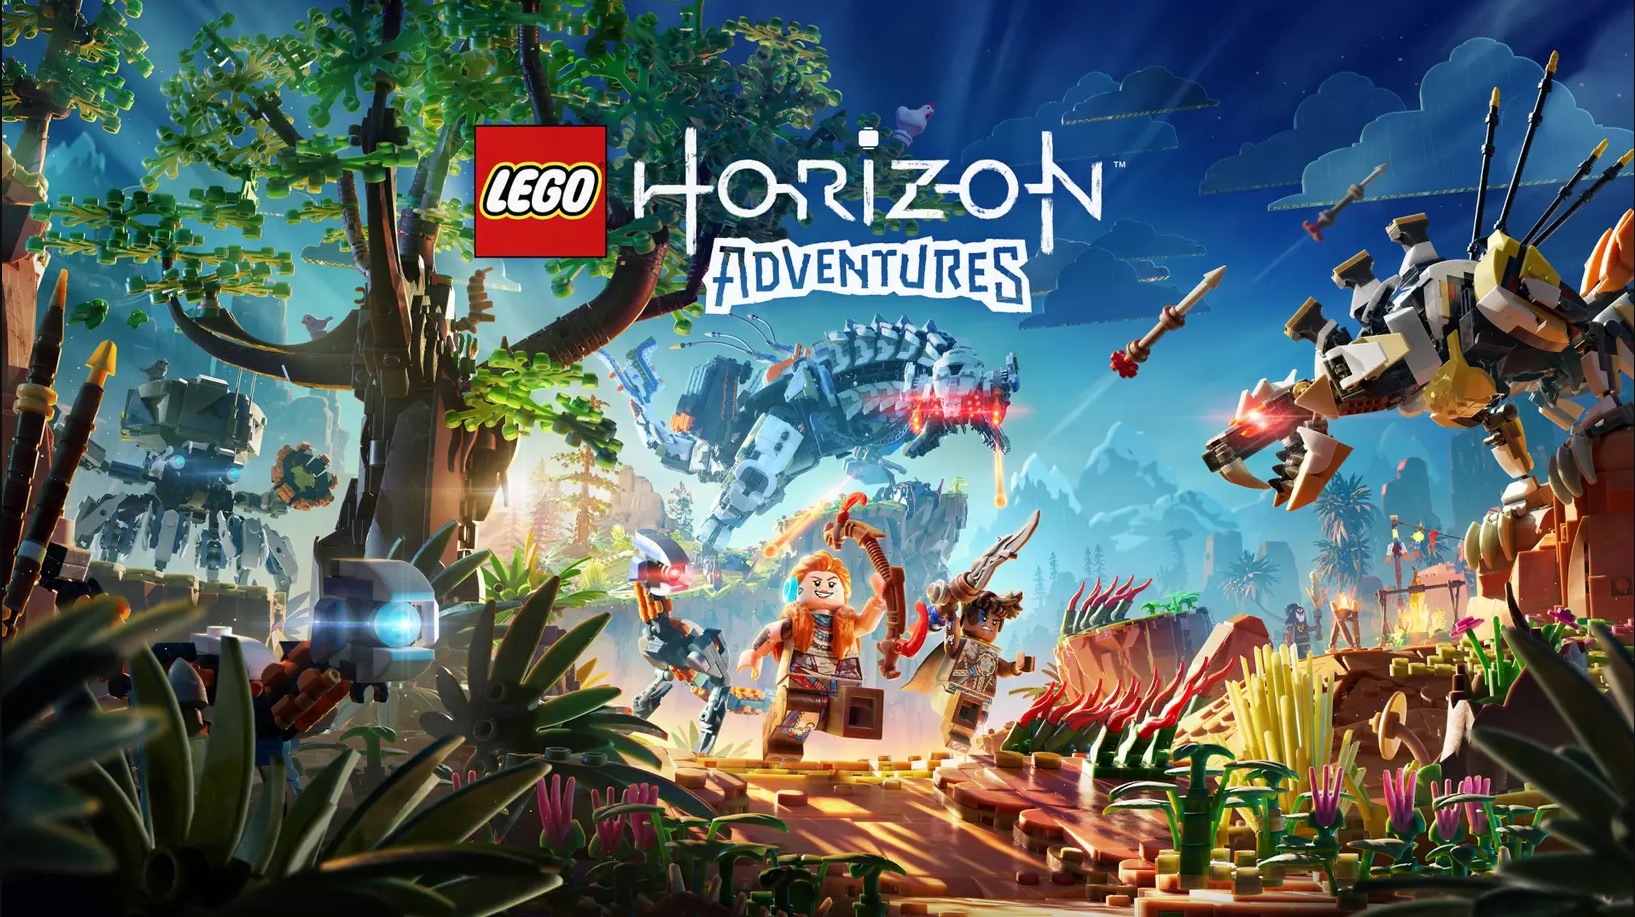 LEGO Horizon Adventures is a co-op spinoff launching this Holiday season